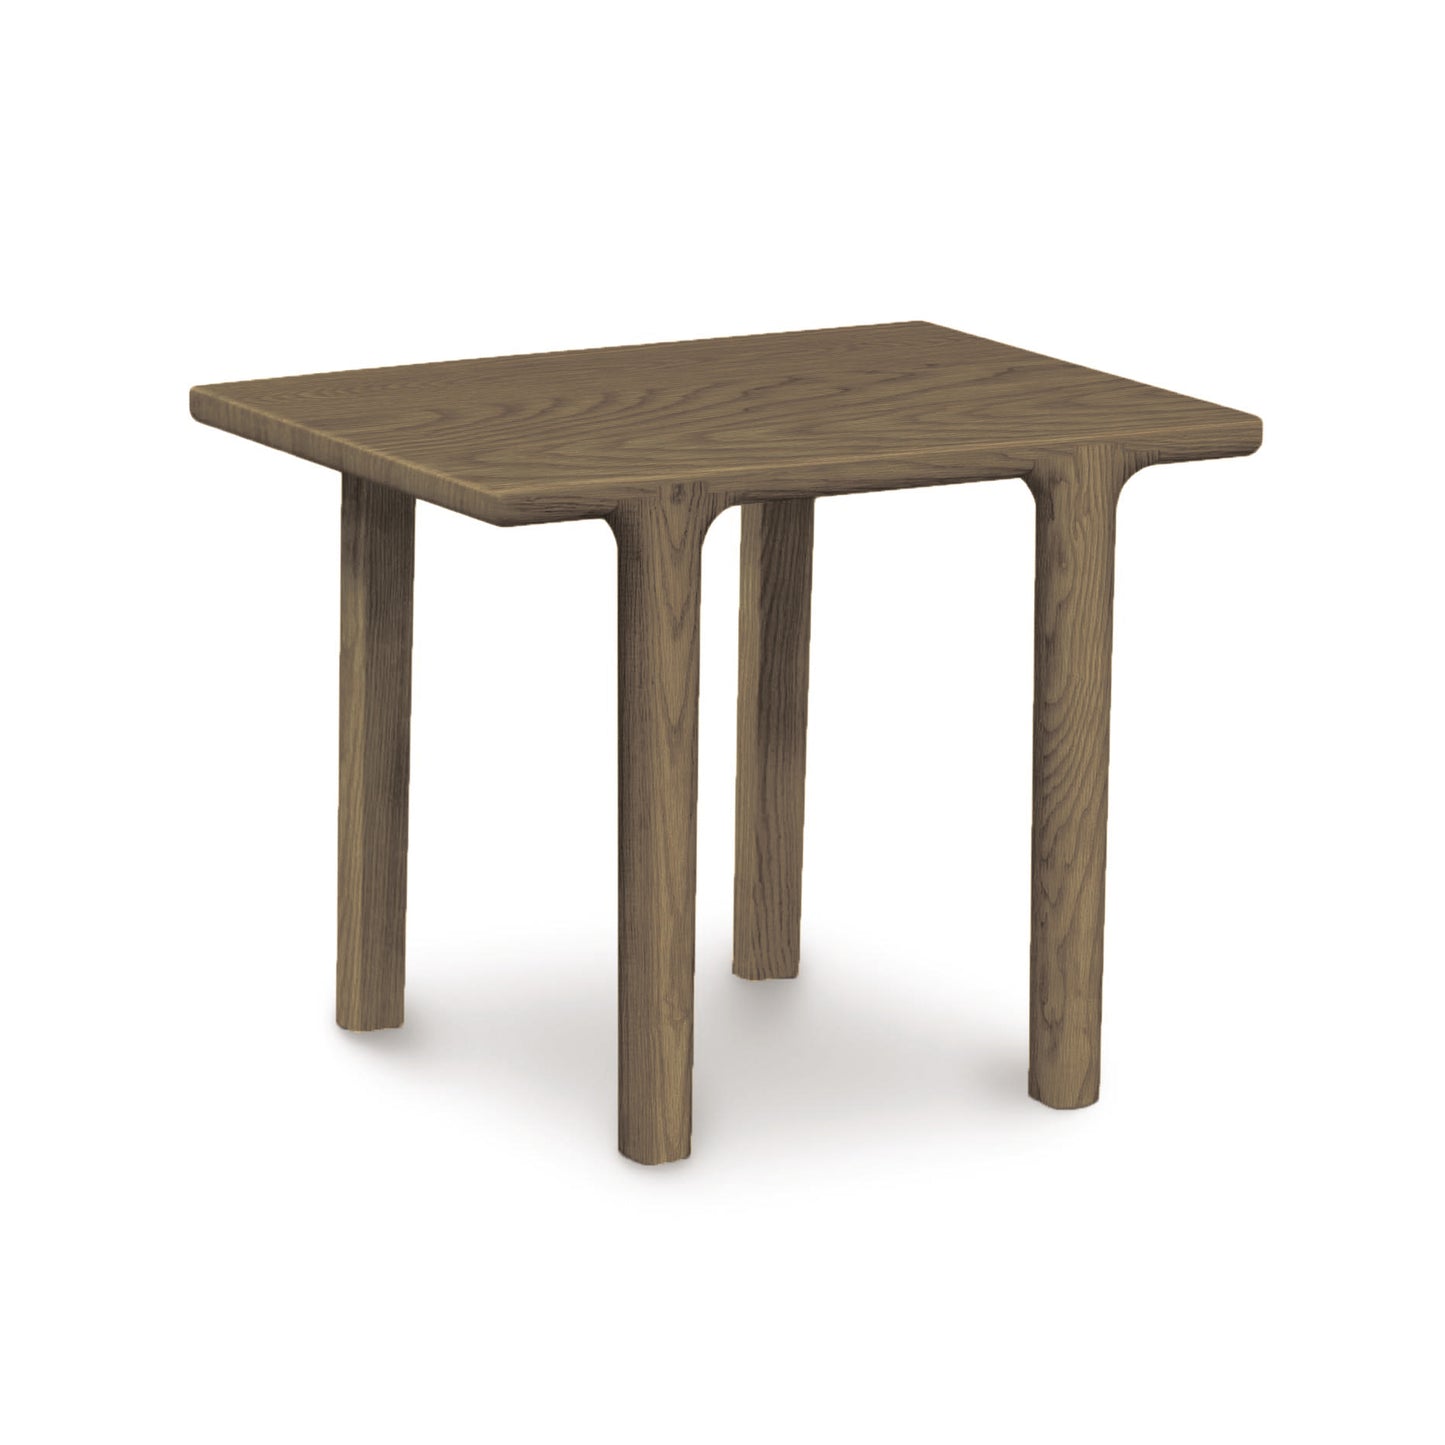 The Copeland Furniture Sierra Rectangular End Table adds a touch of modern personality with its sleek design and wooden legs, making it the perfect addition to any Sierra seating arrangement.